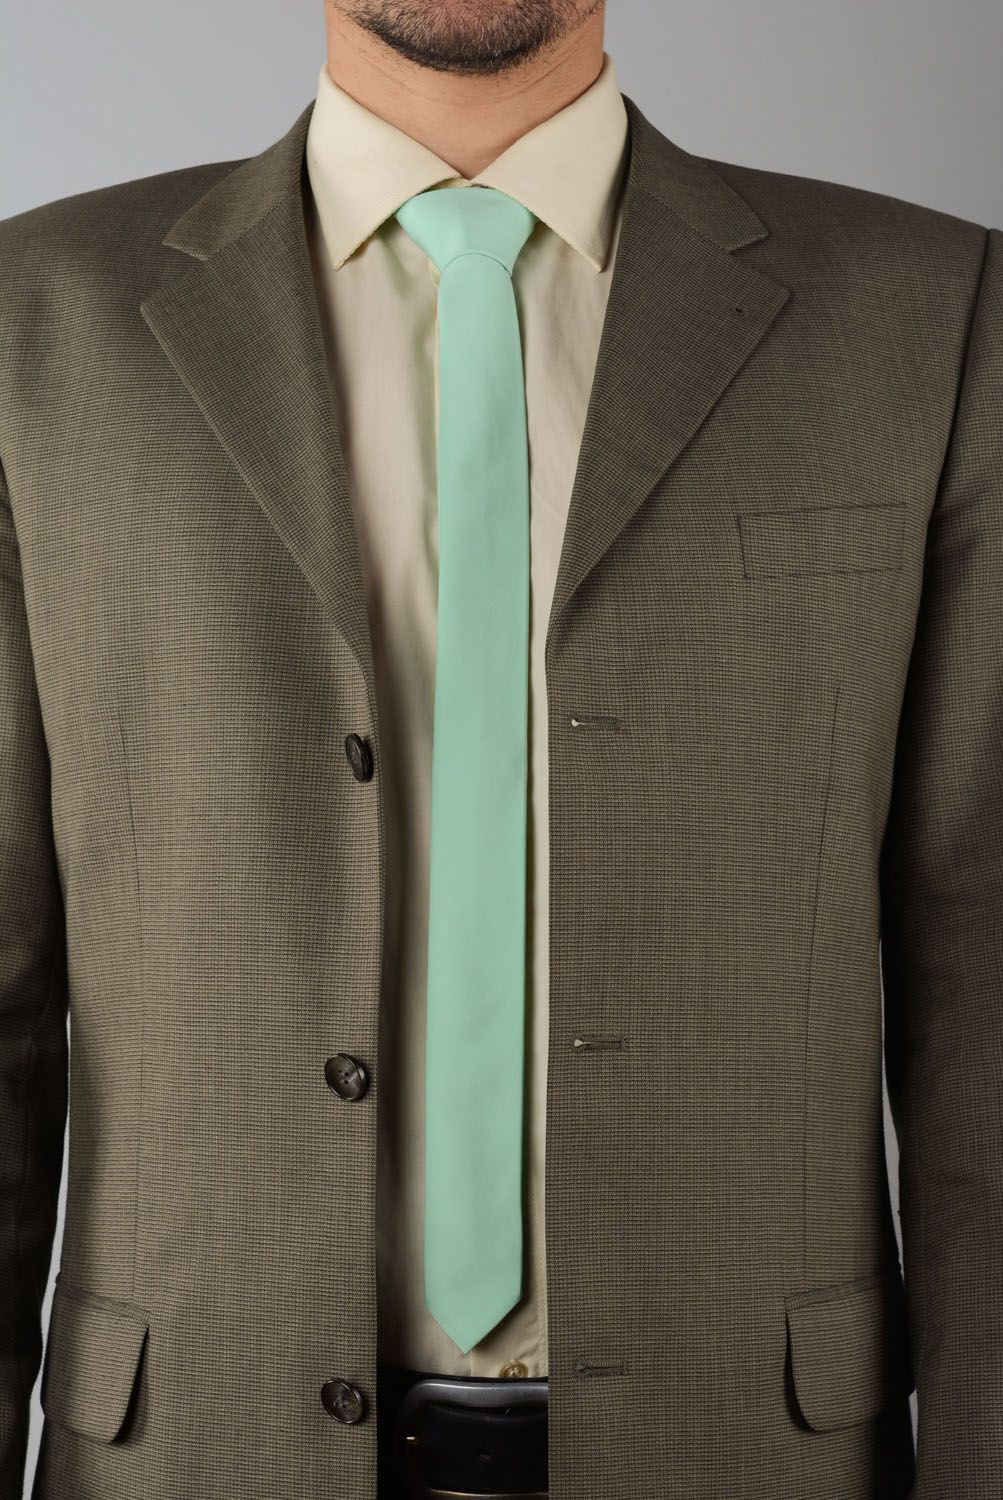 Thin tie of mint color photo 1